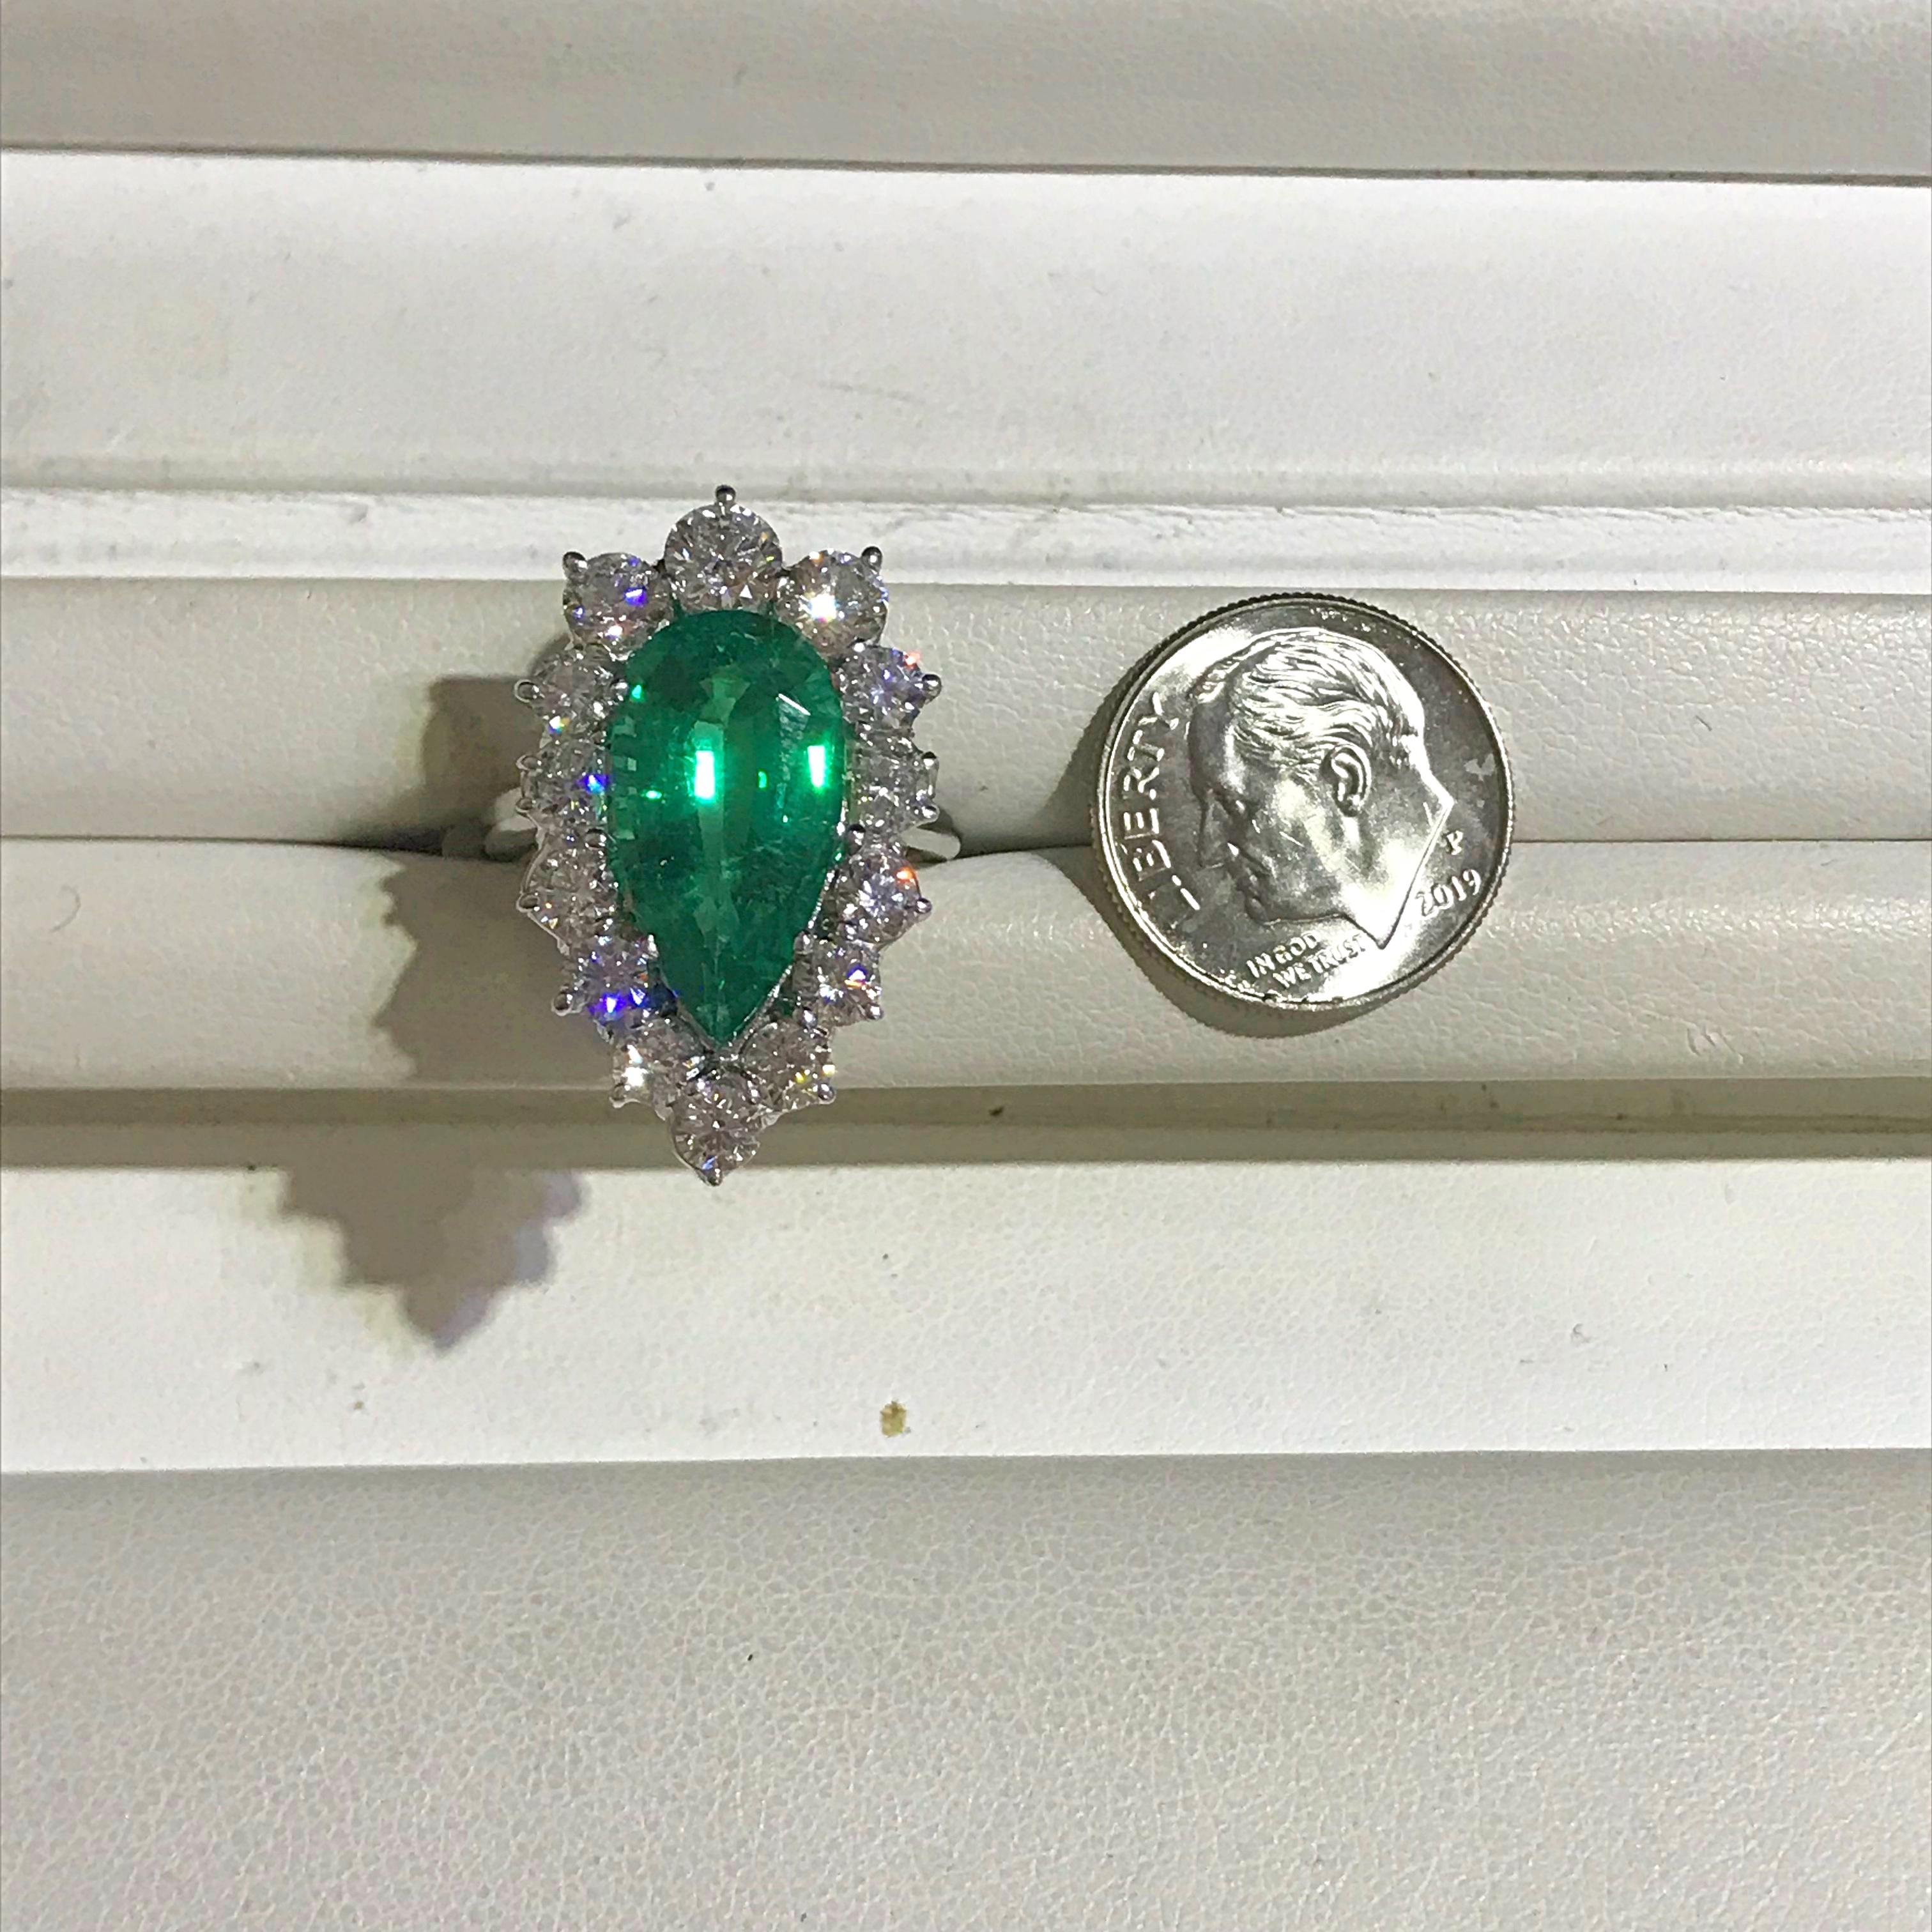 This vivid green Emerald is an elongated pear shape and fashionably surrounded by 2.48 carats total weight of diamonds. The ring is crafted from Platinum and is currently a size 6. The ring is sizeable. Please contact us with any questions or